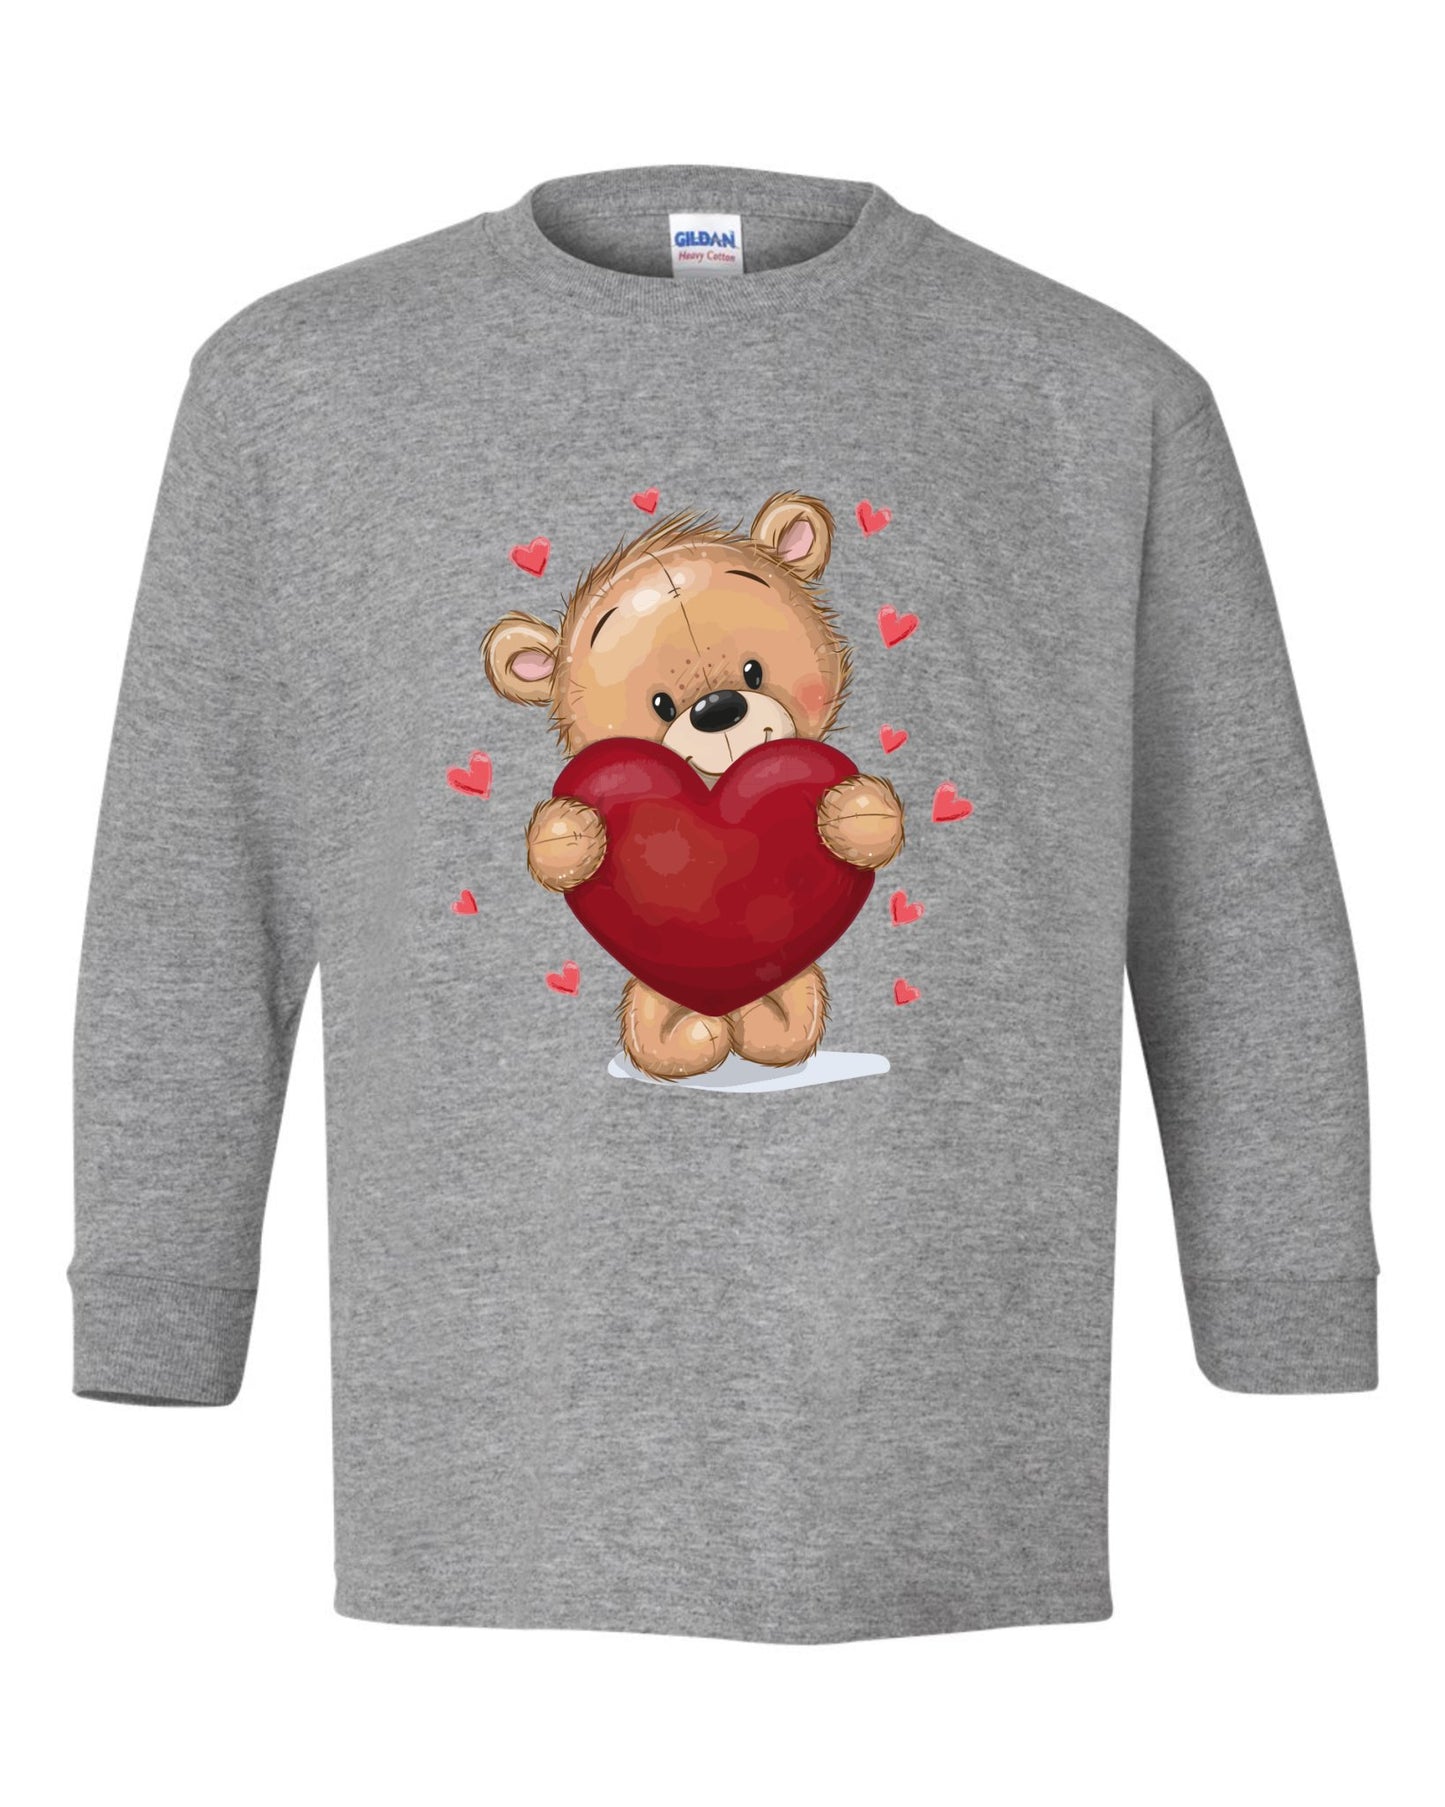 Valentine Heart Teddy Bear Long Sleeve T Shirt (Infant, Toddler, or Youth) - SBS T Shop